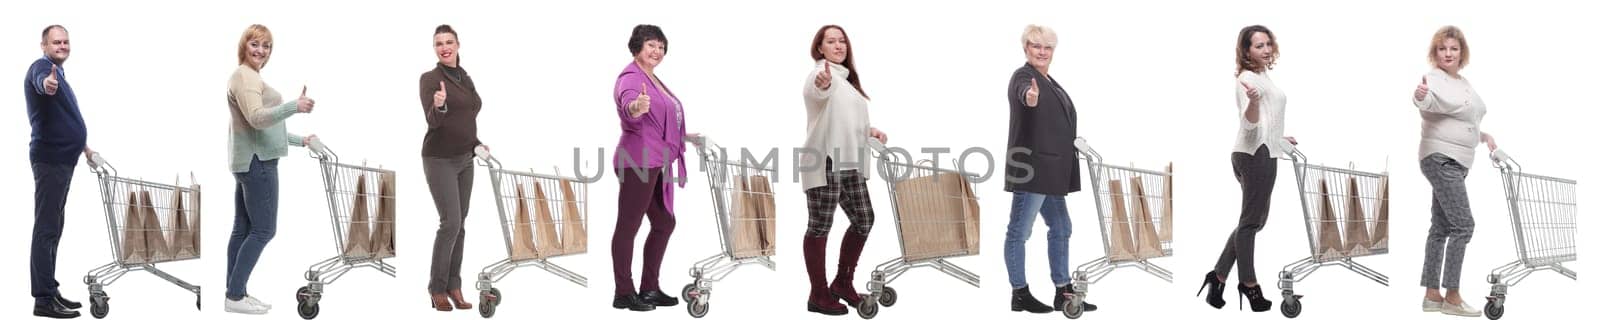 a group of people in profile with a basket showing thumbs up by asdf